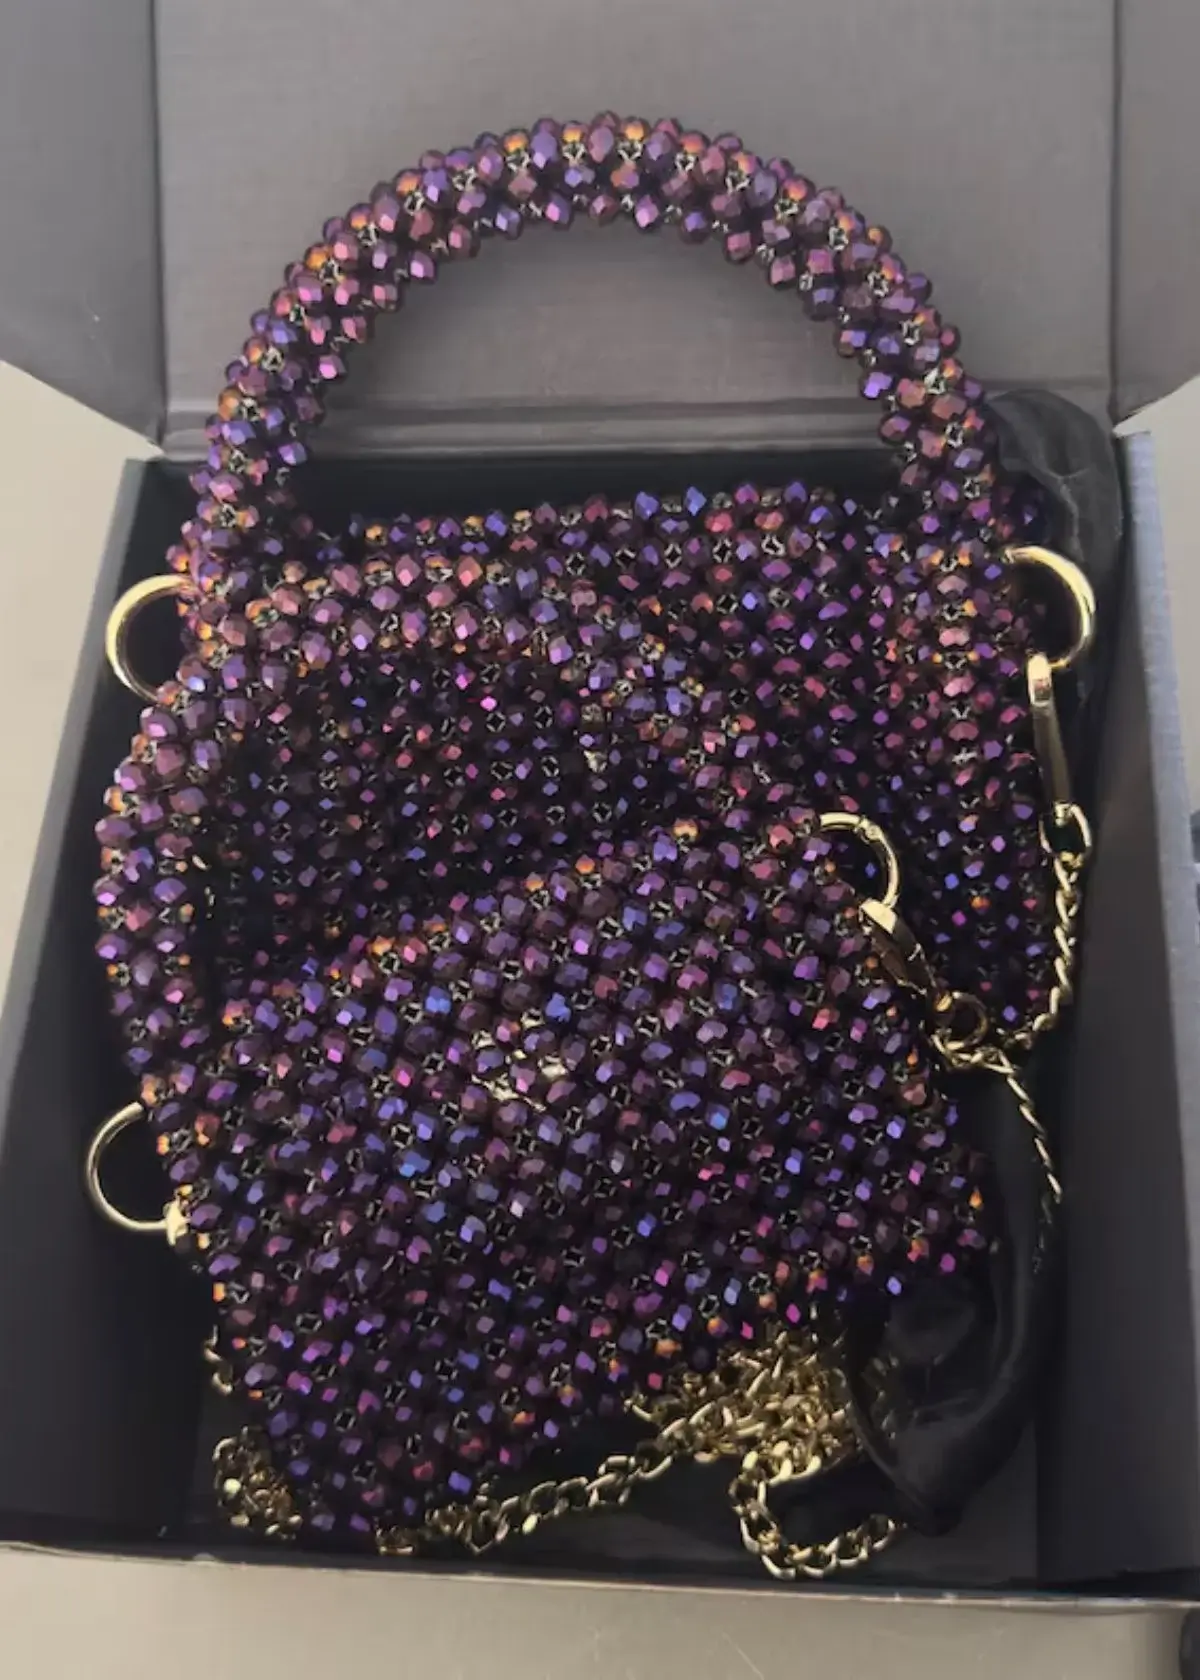 How to choose the right Beaded Bag?